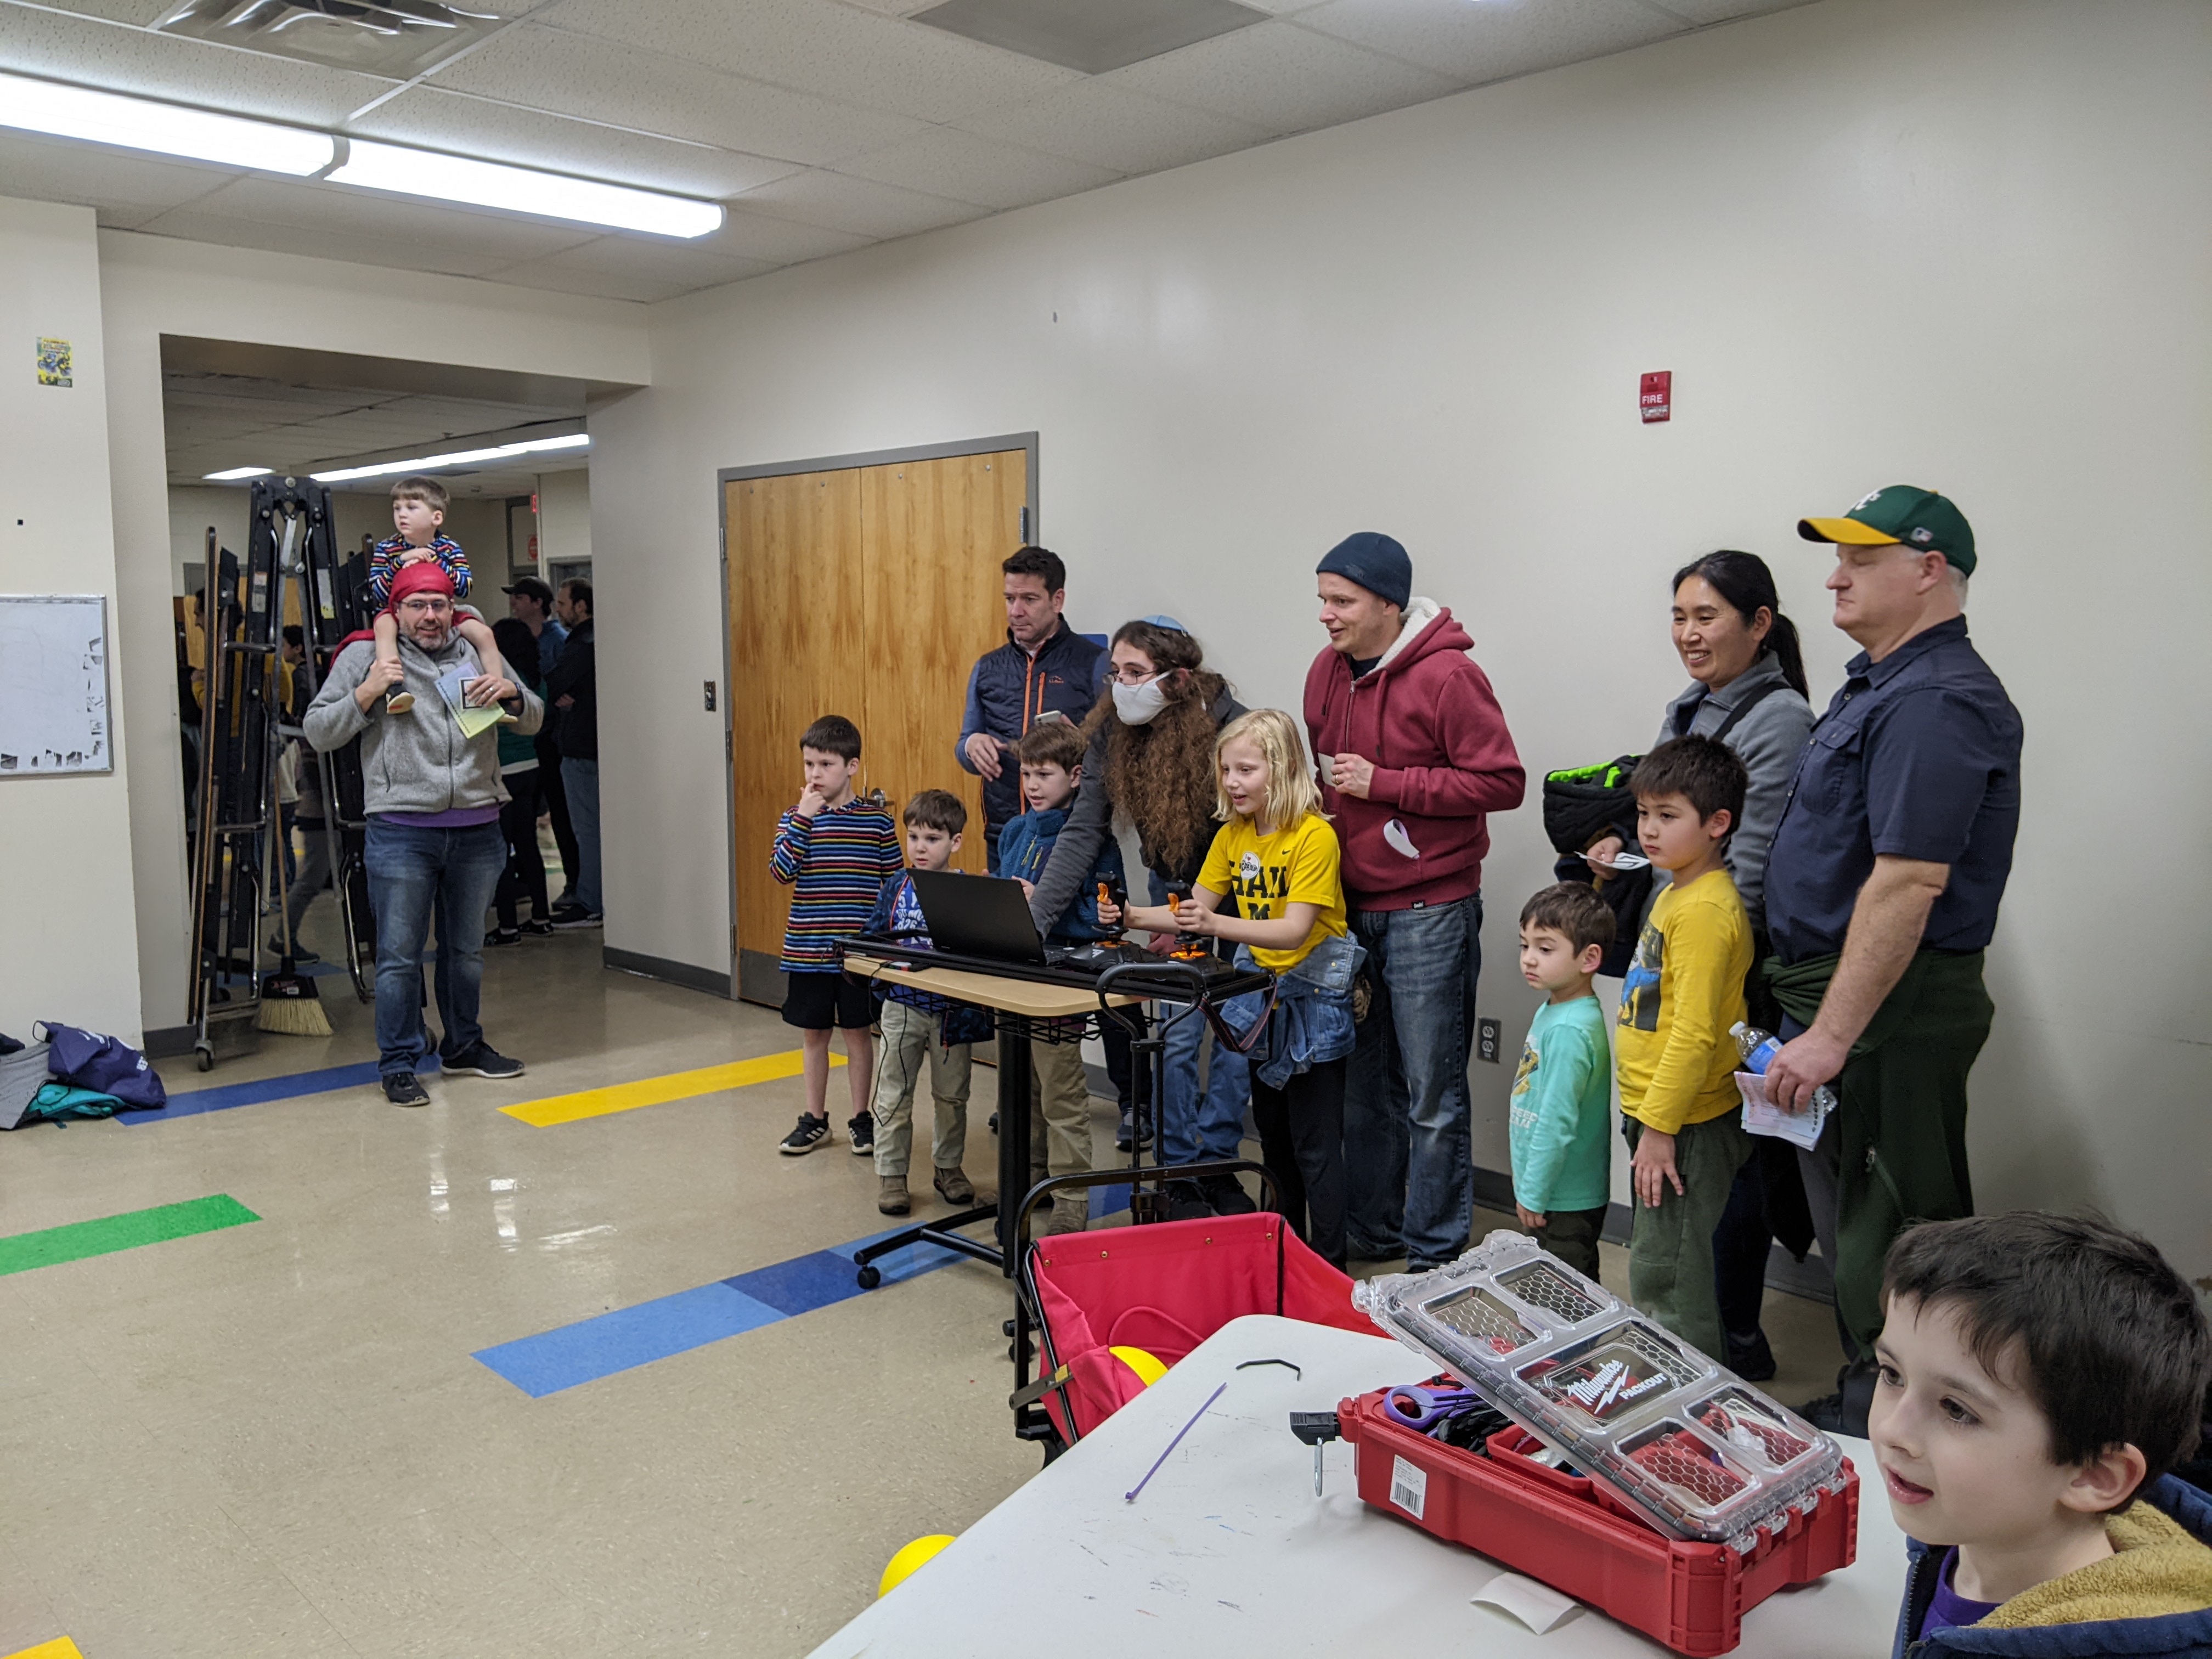 A team member helping a child drive the robot.